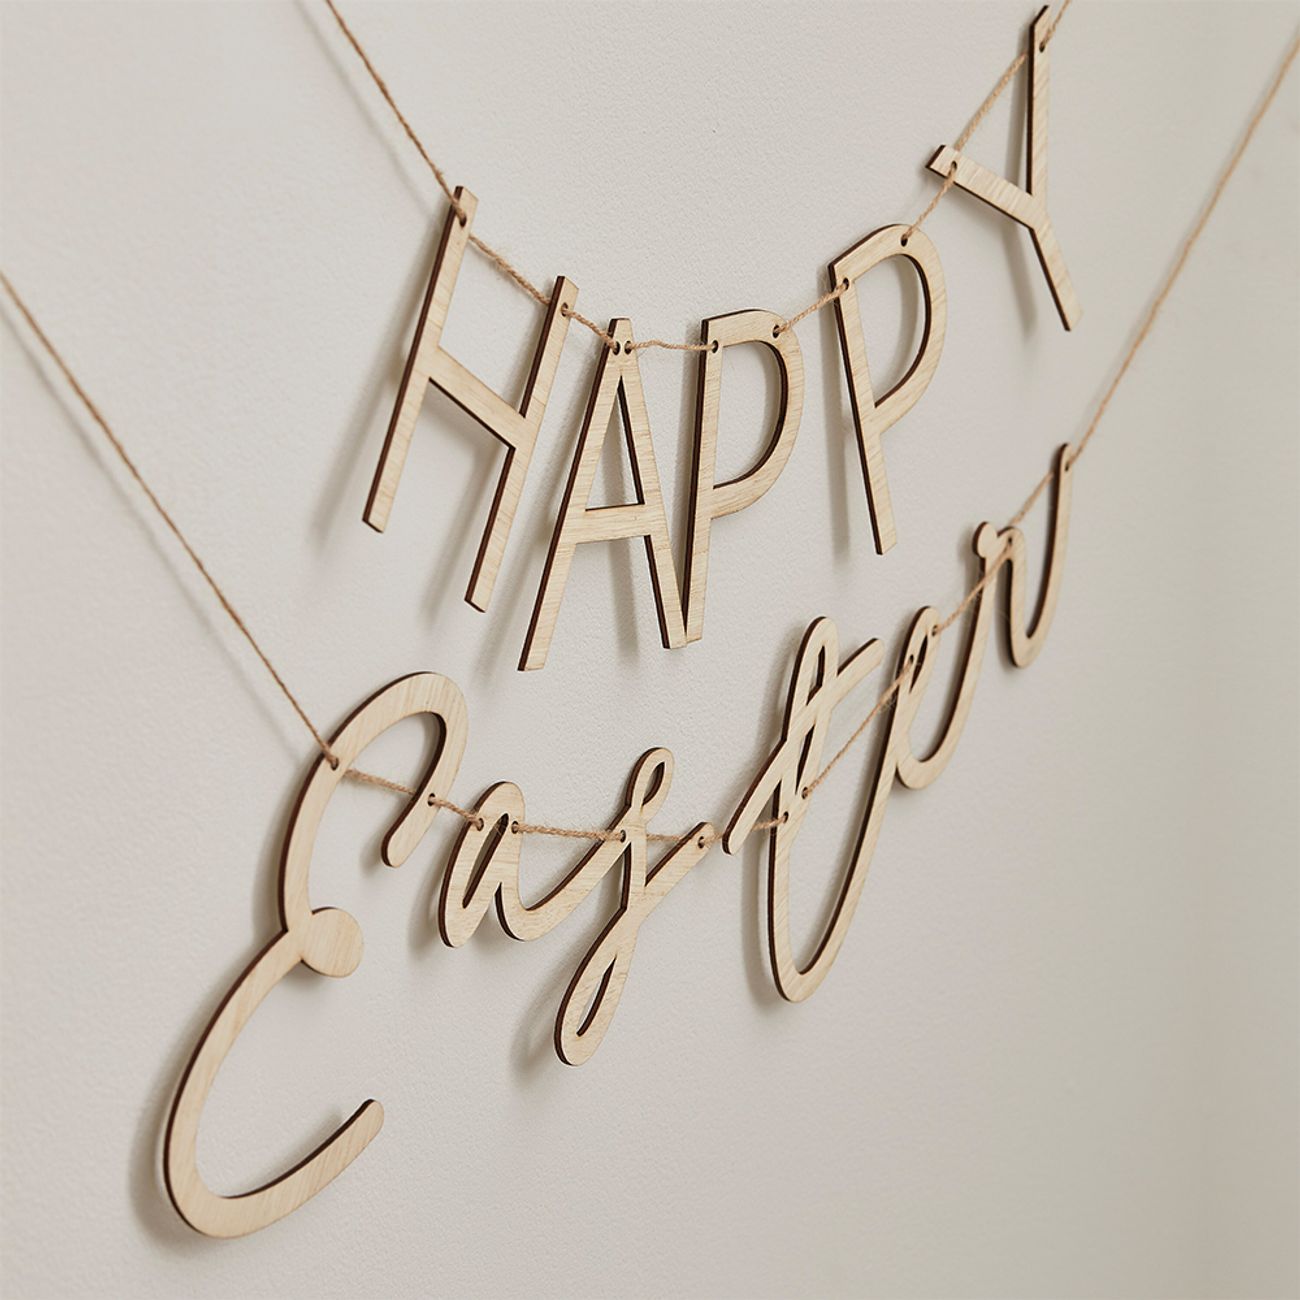 girlang-happy-easter-i-tra-82884-3